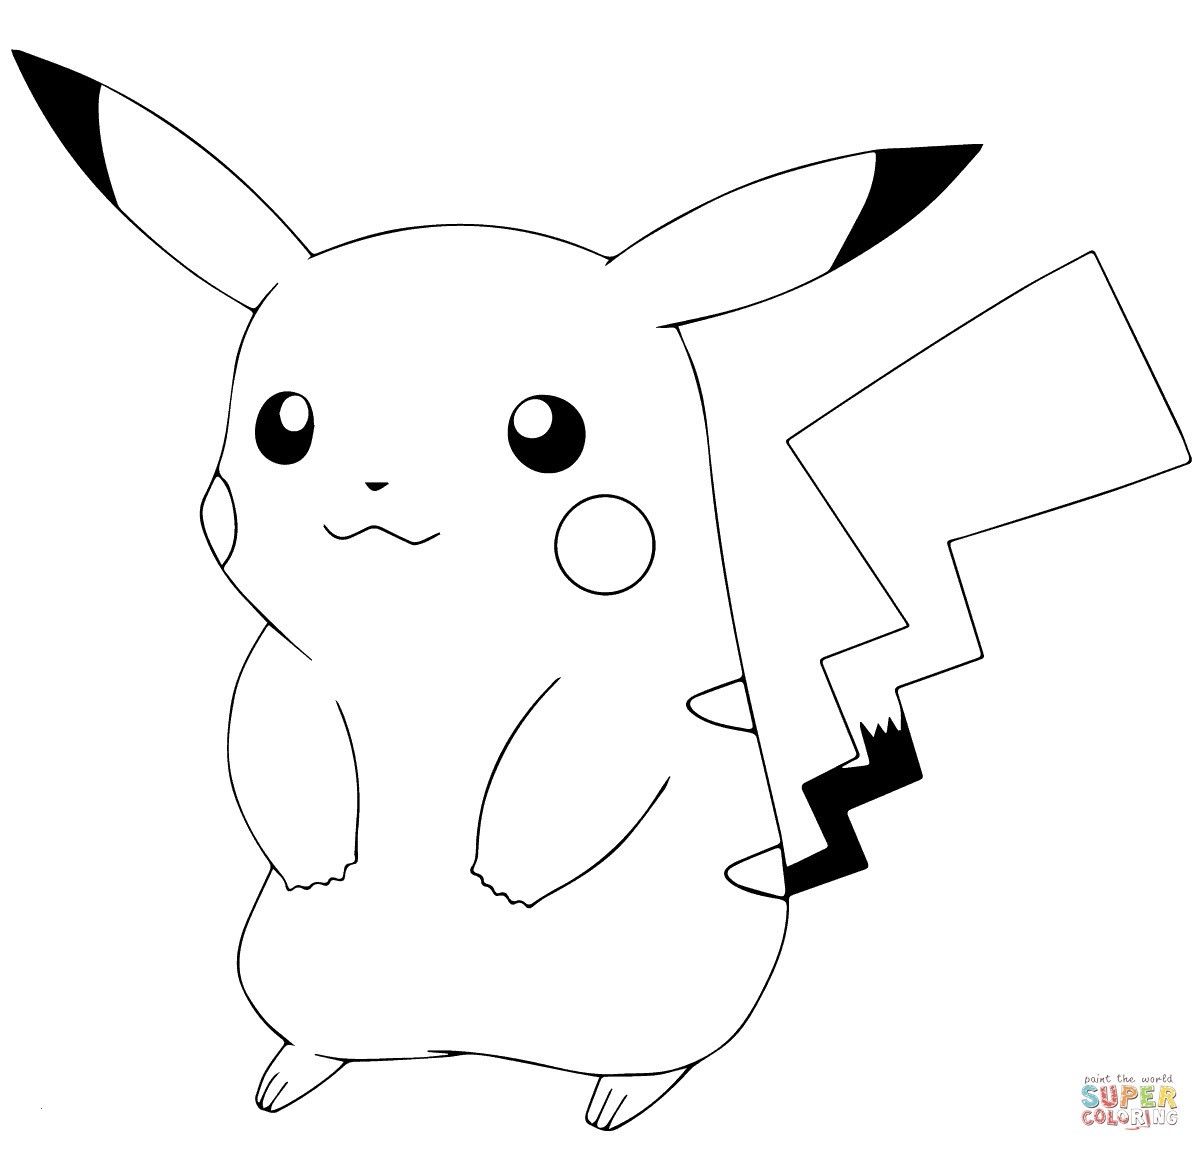 Pikachu face coloring page â from the thousands of photos on the net regarding pikachu face colorâ pikachu coloring page pokemon coloring pokemon coloring pages